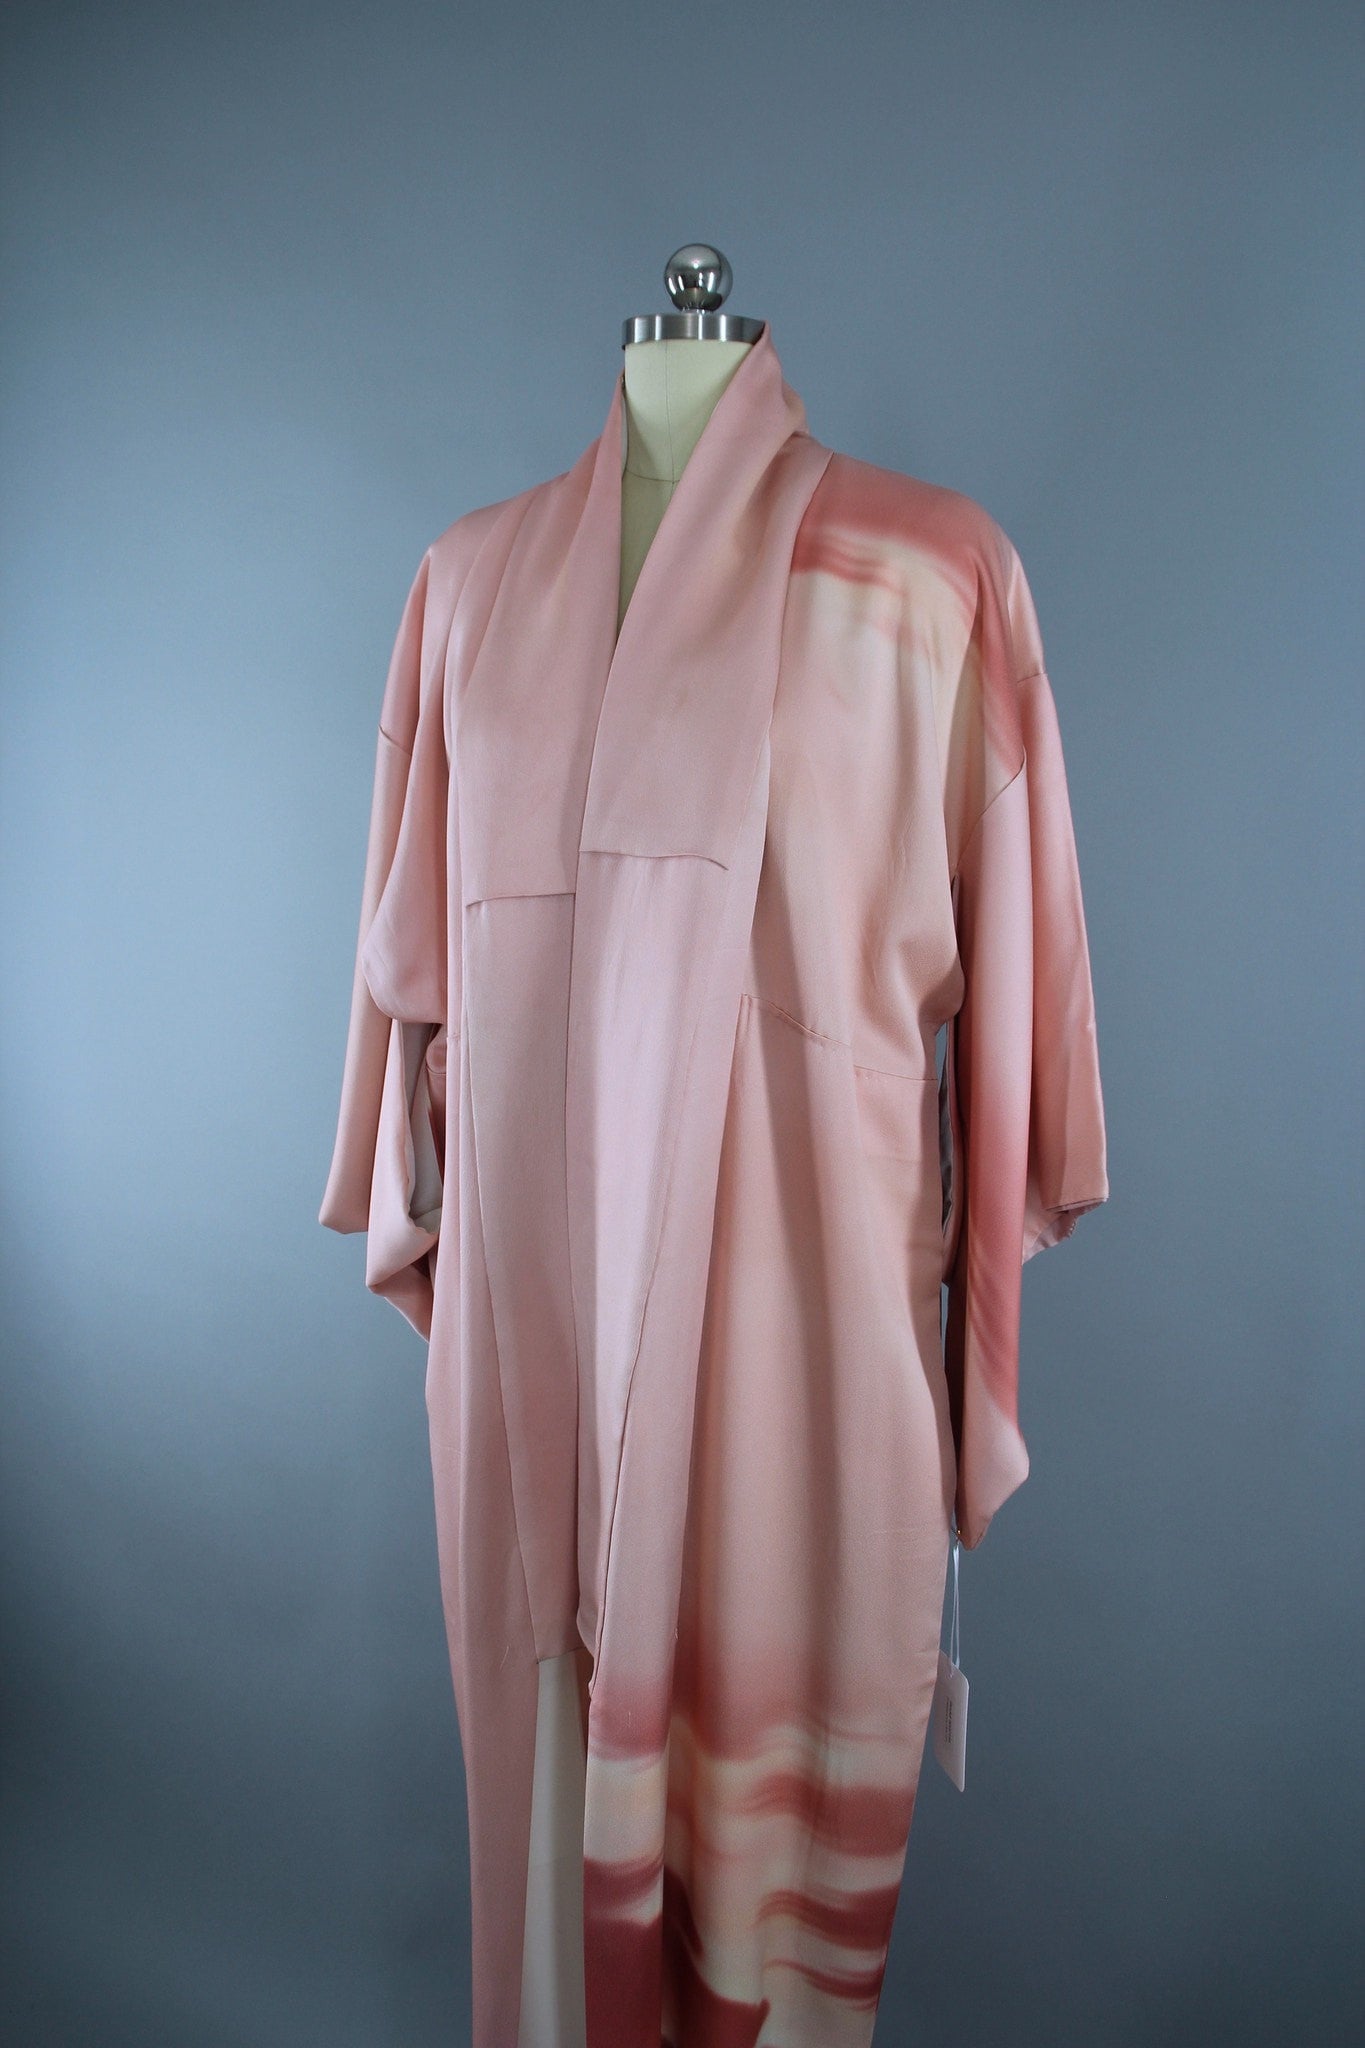 1970s Vintage Kimono Robe with Pink Clouds Print - ThisBlueBird